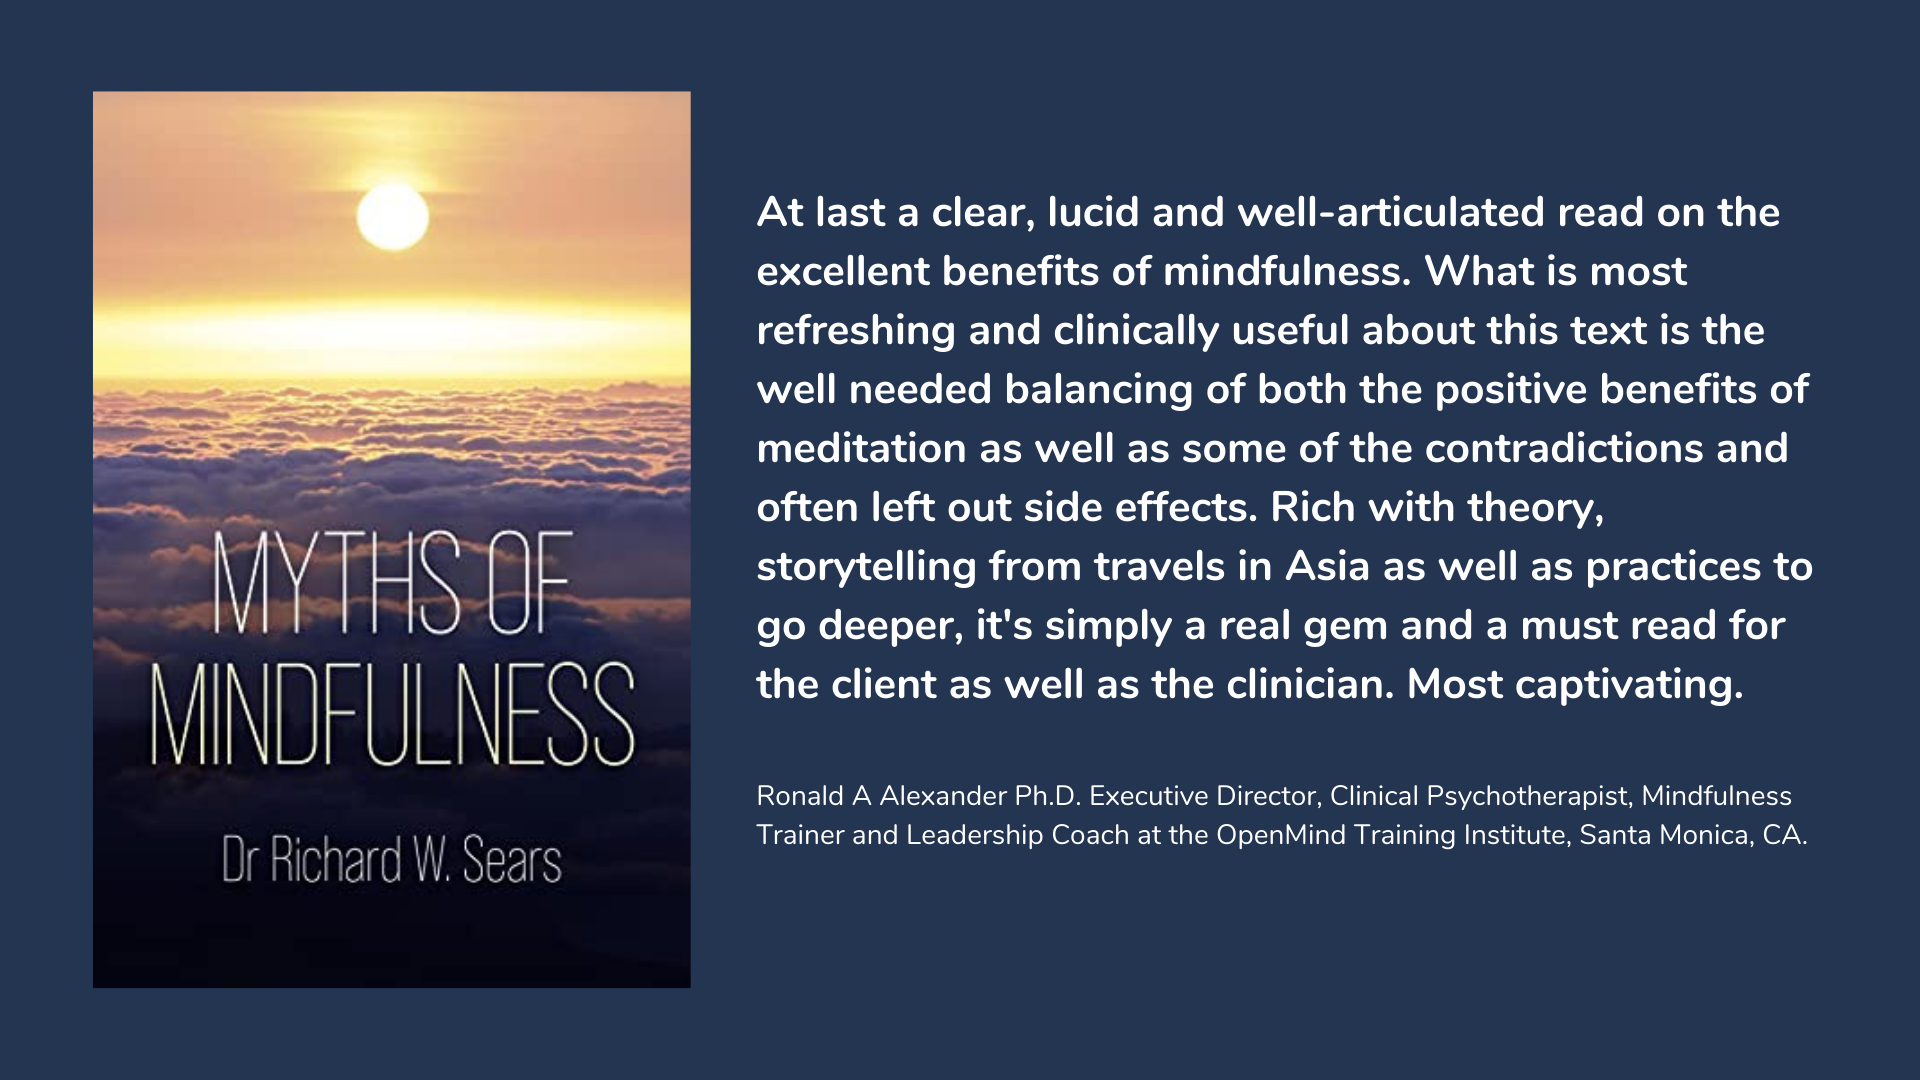 Myths of Mindfulness by Dr Richard W. Sears book cover and description.